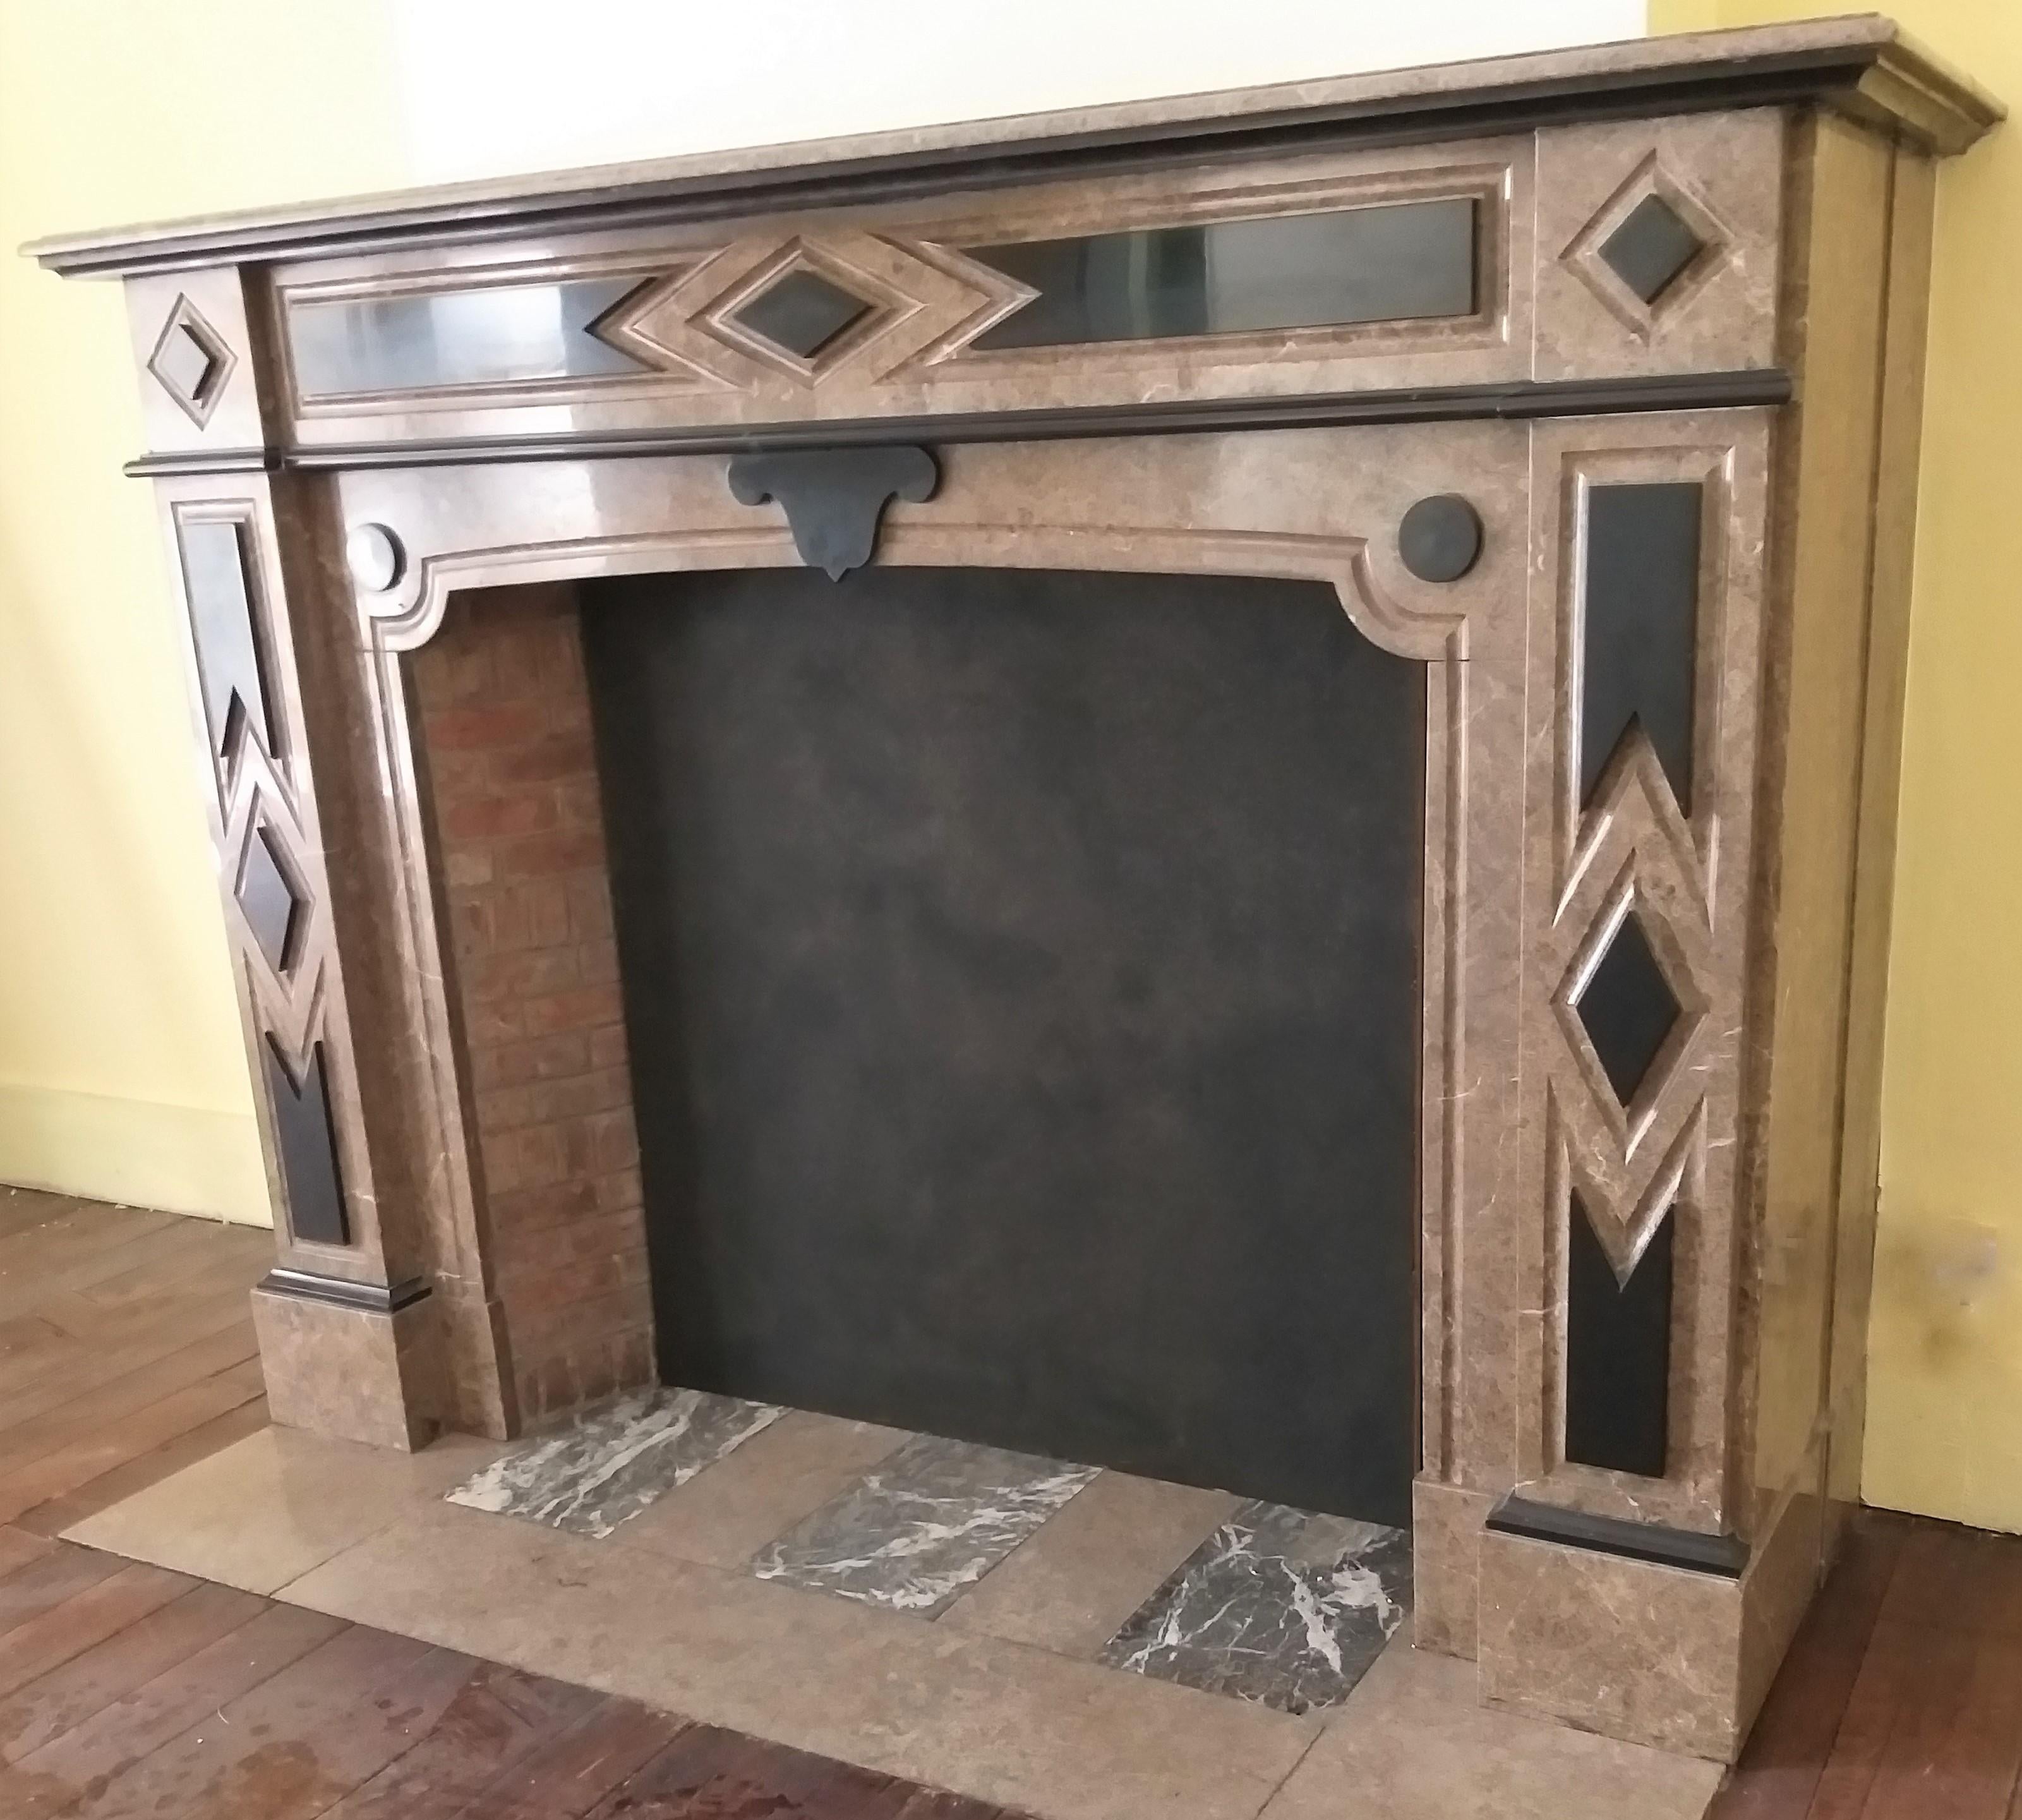 A late 19th century, polished fireplace from Italy, made out of an Italian, warm-brown marble: Napoléon Grande Mélange.
The blackest black Belgian marble: Noir de Mazy, is fancy decorating the frieze, jambs, foyer-frame and the moulded shelf.
The